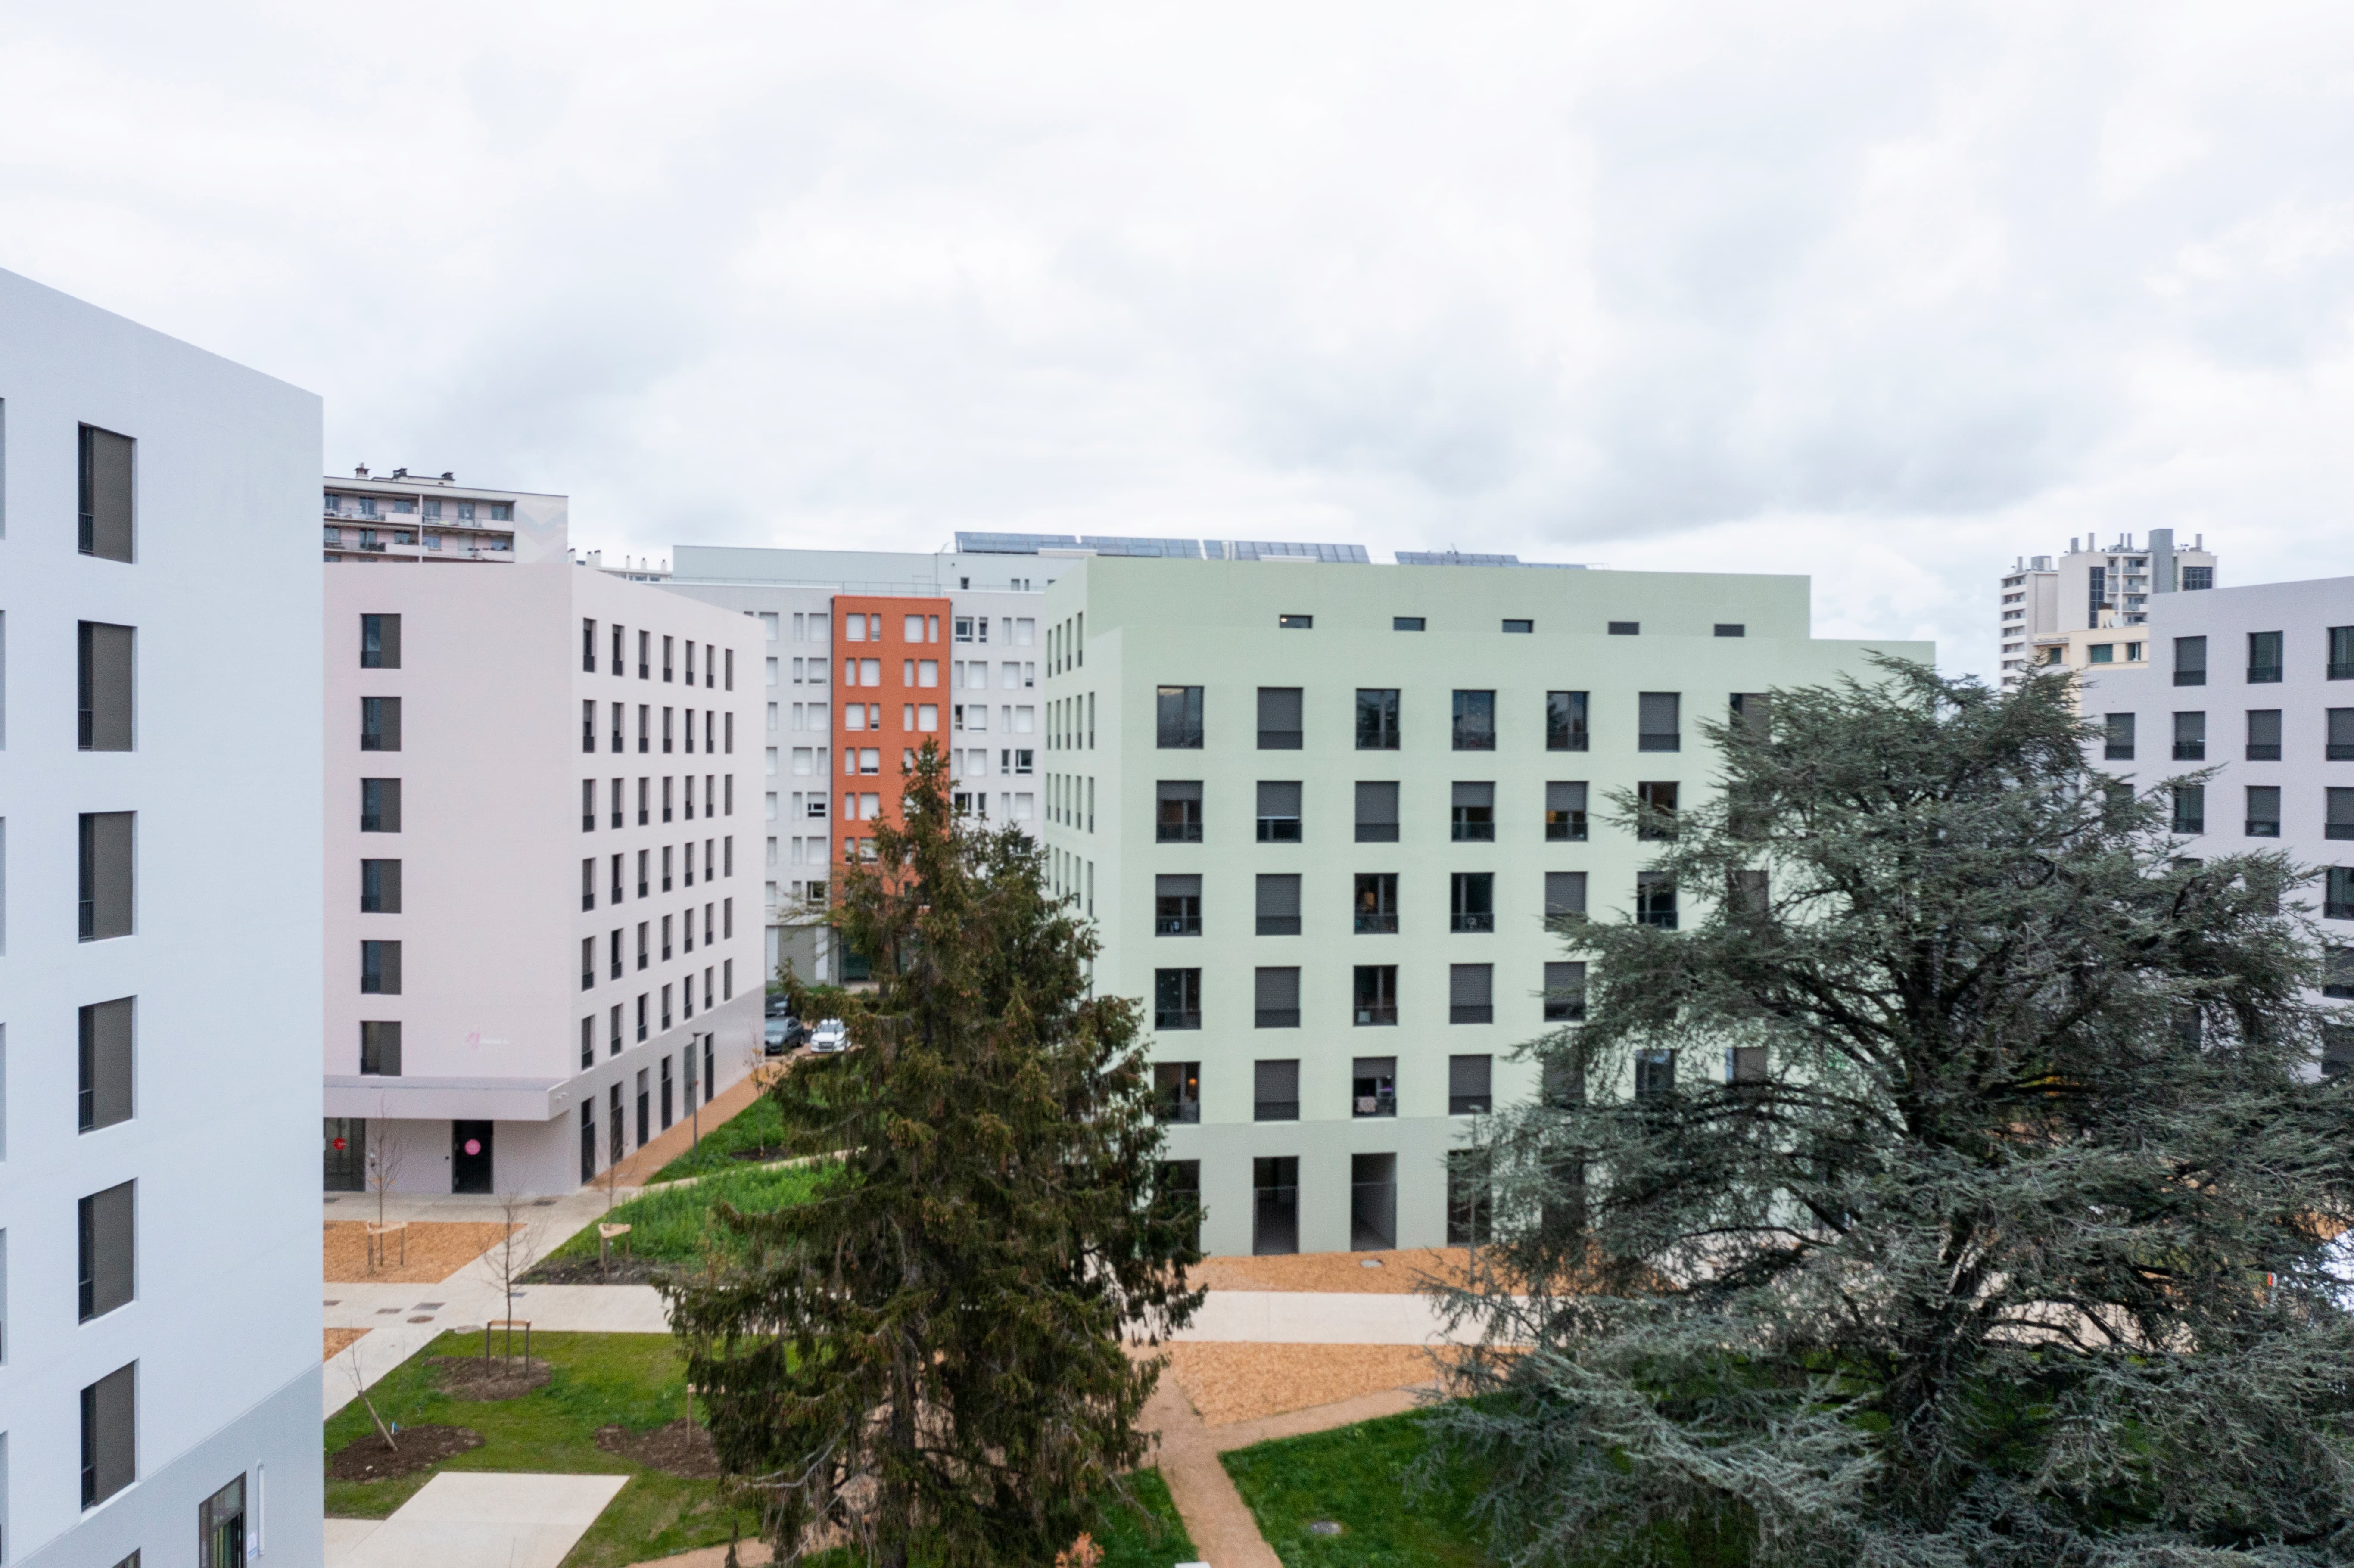 CROUS LYON INAUGURATION RESIDENCE CLAUDIE HAIGNERE VUE DRONE 29NOV22 ©Thierry Perre 1